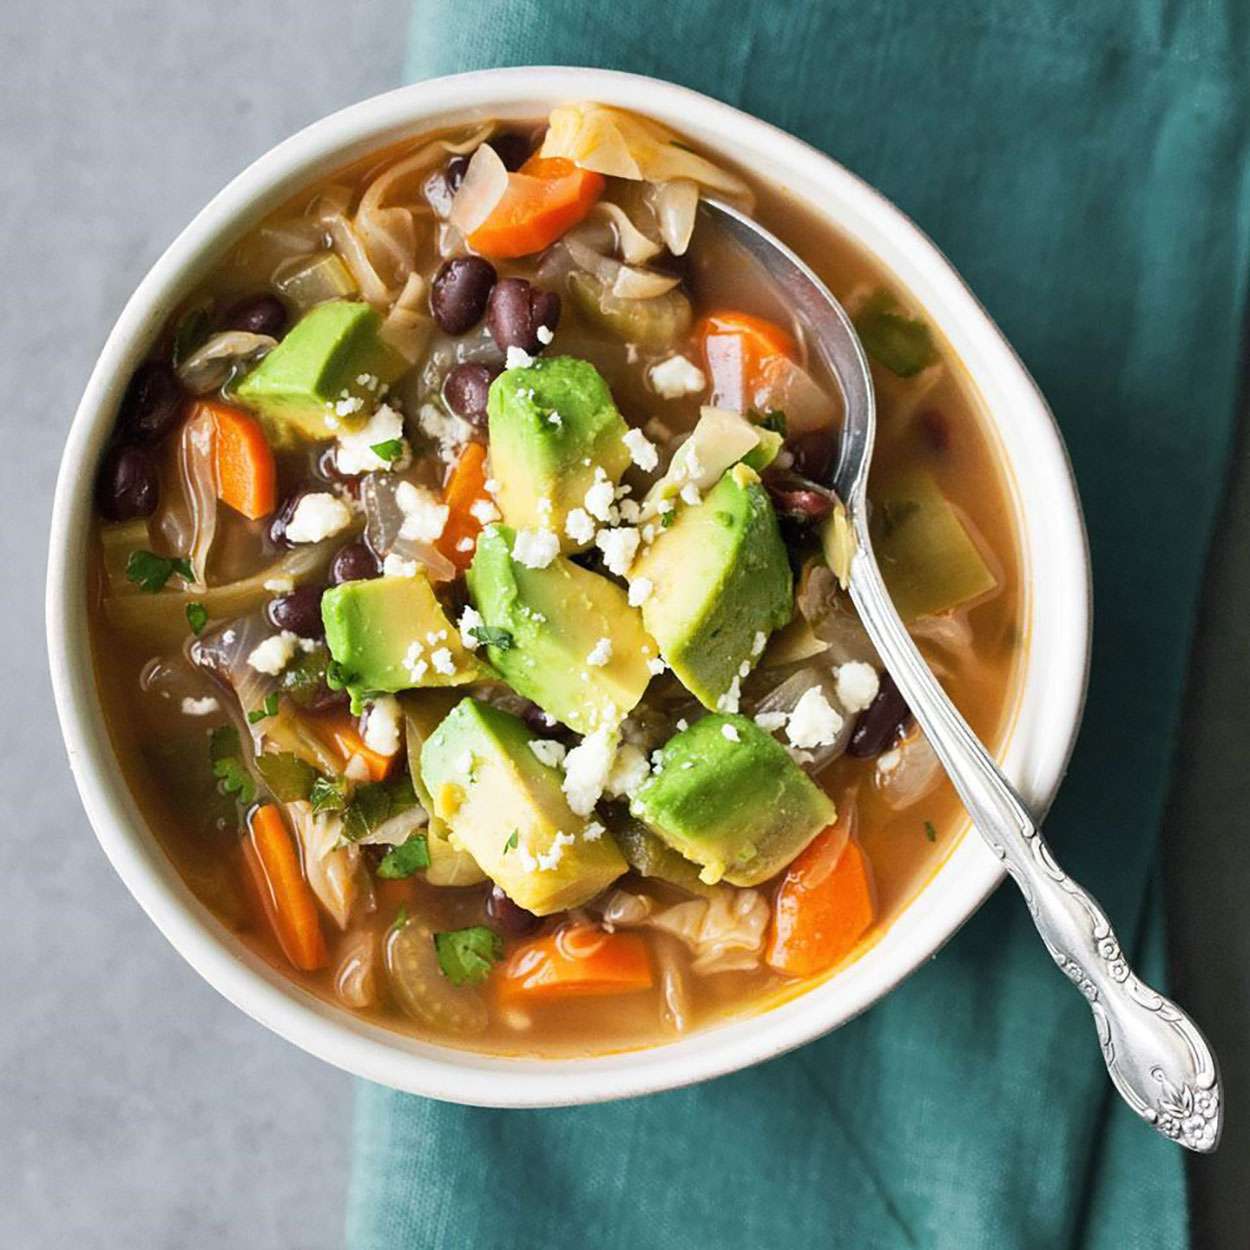 7. Mexican Cabbage Soup